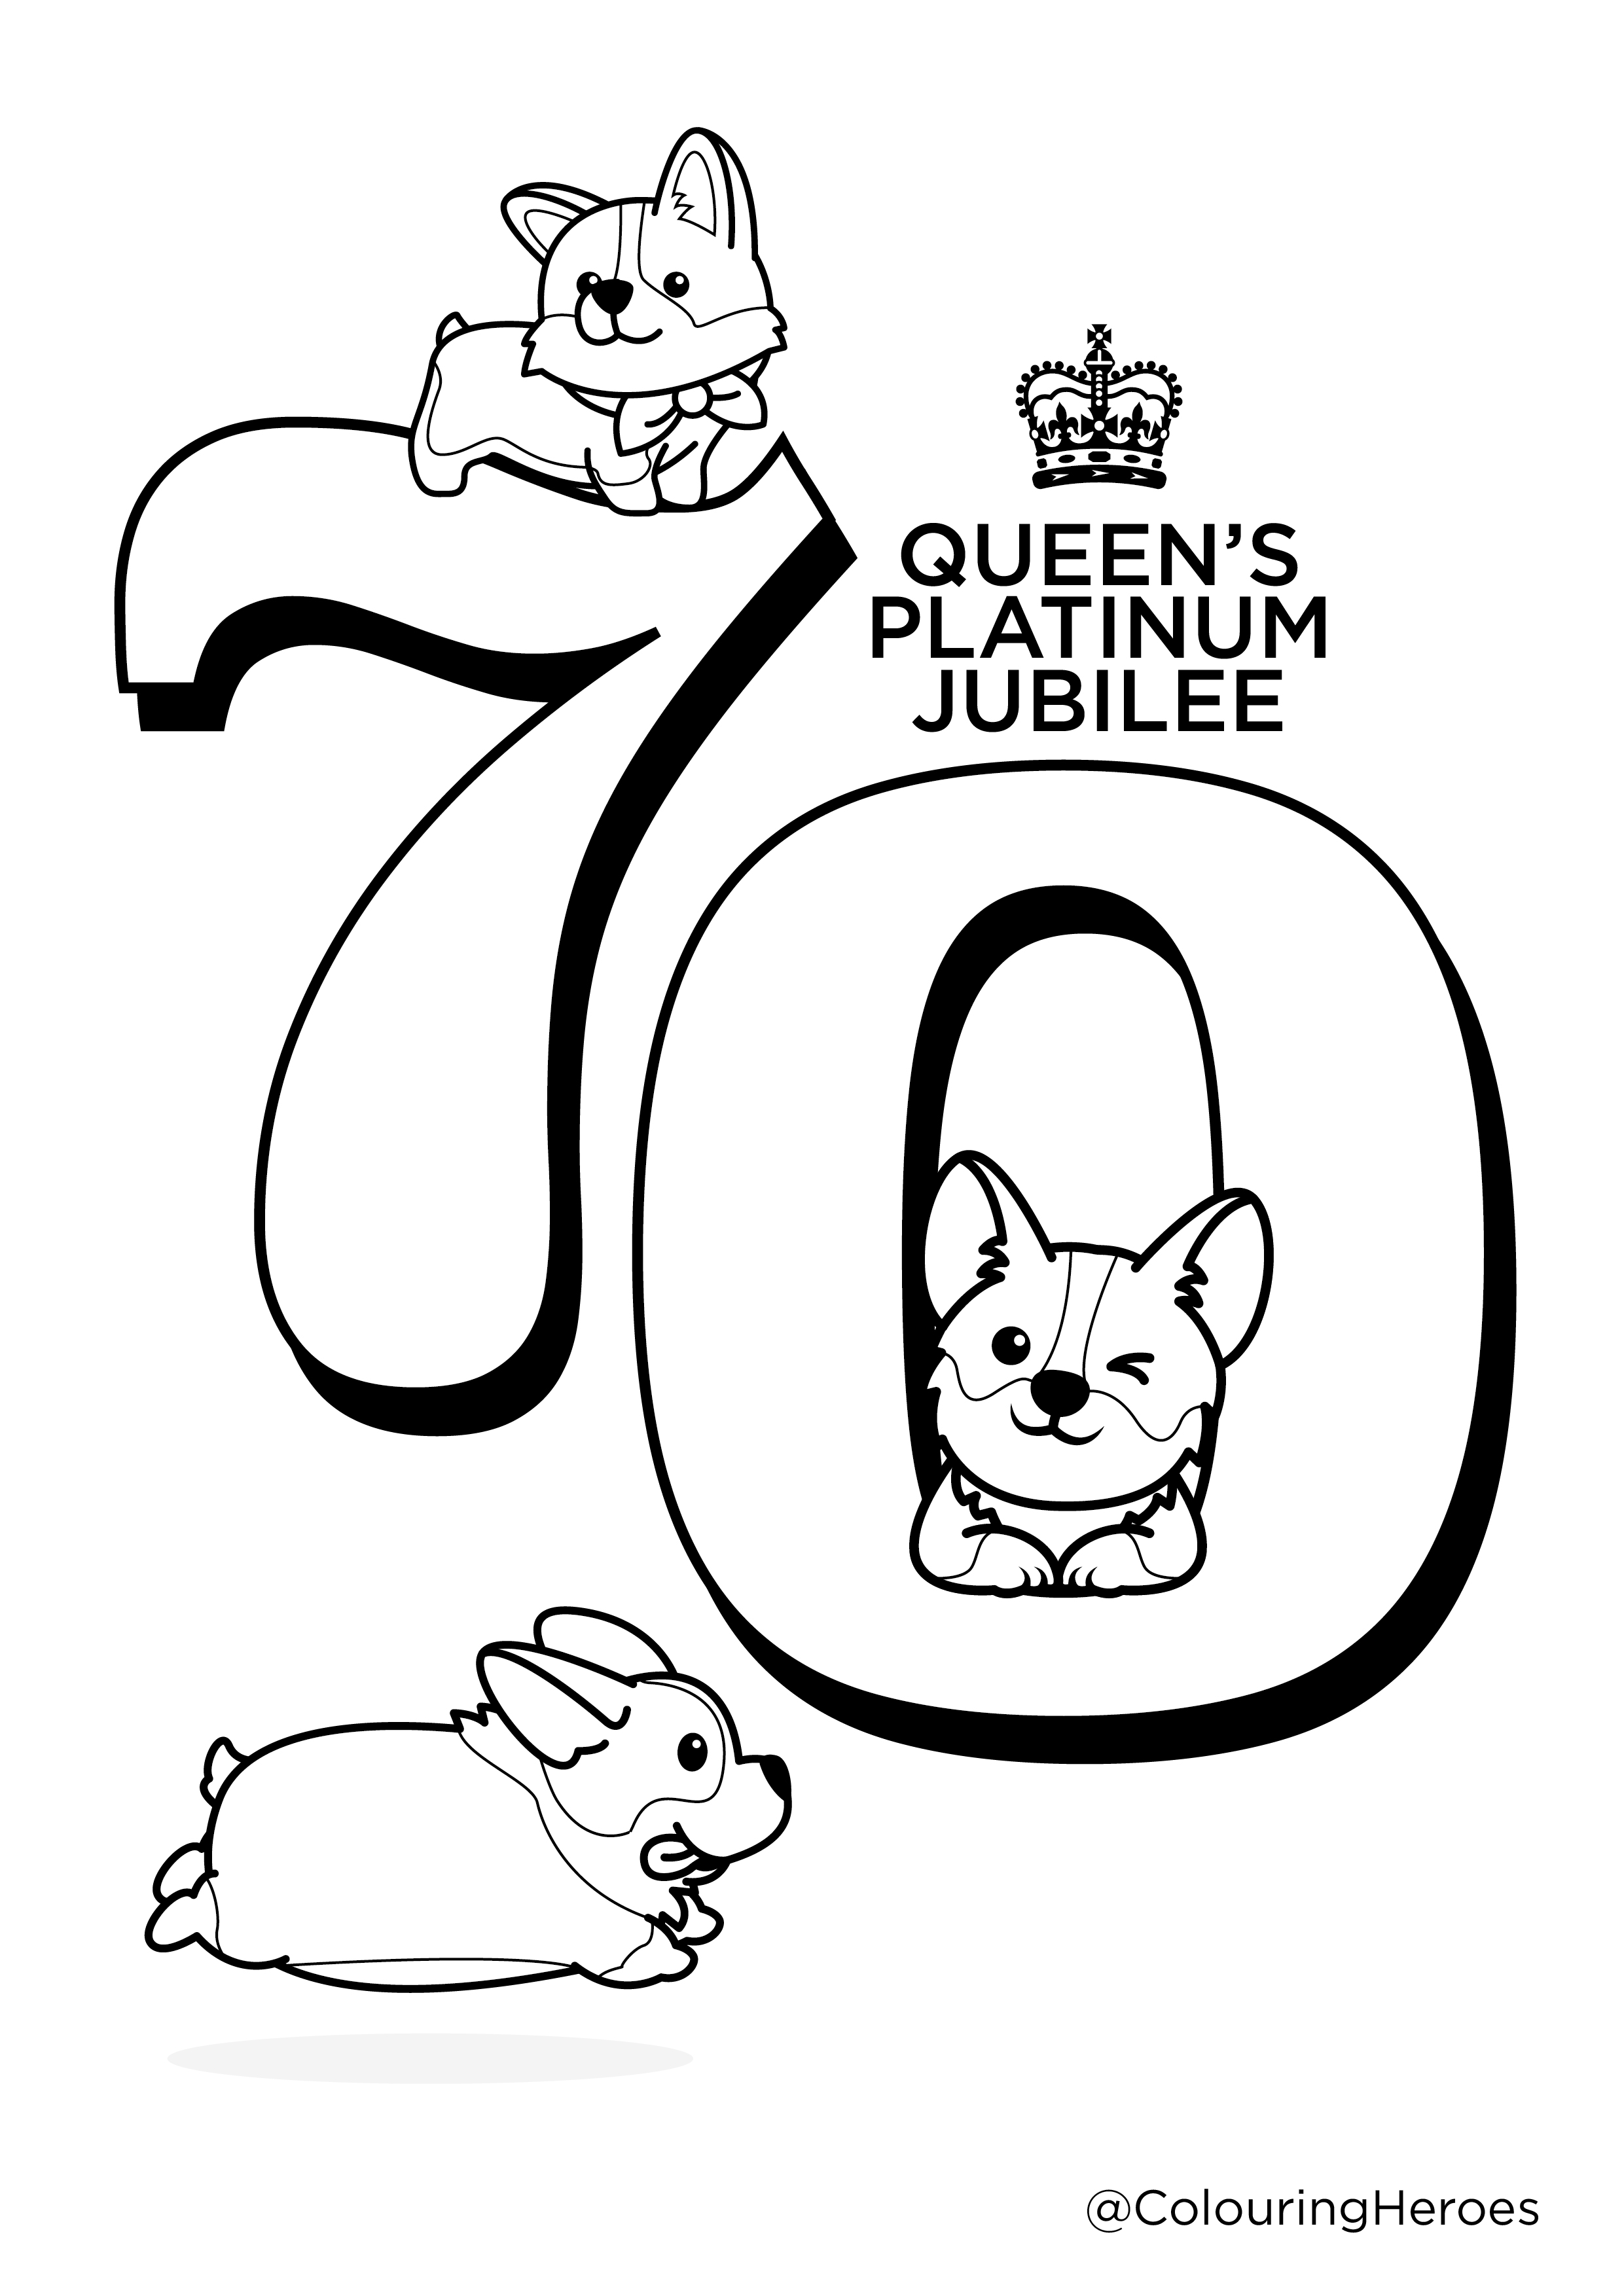 Queen's Platinum Jubilee '70' Colouring In Sheet  image